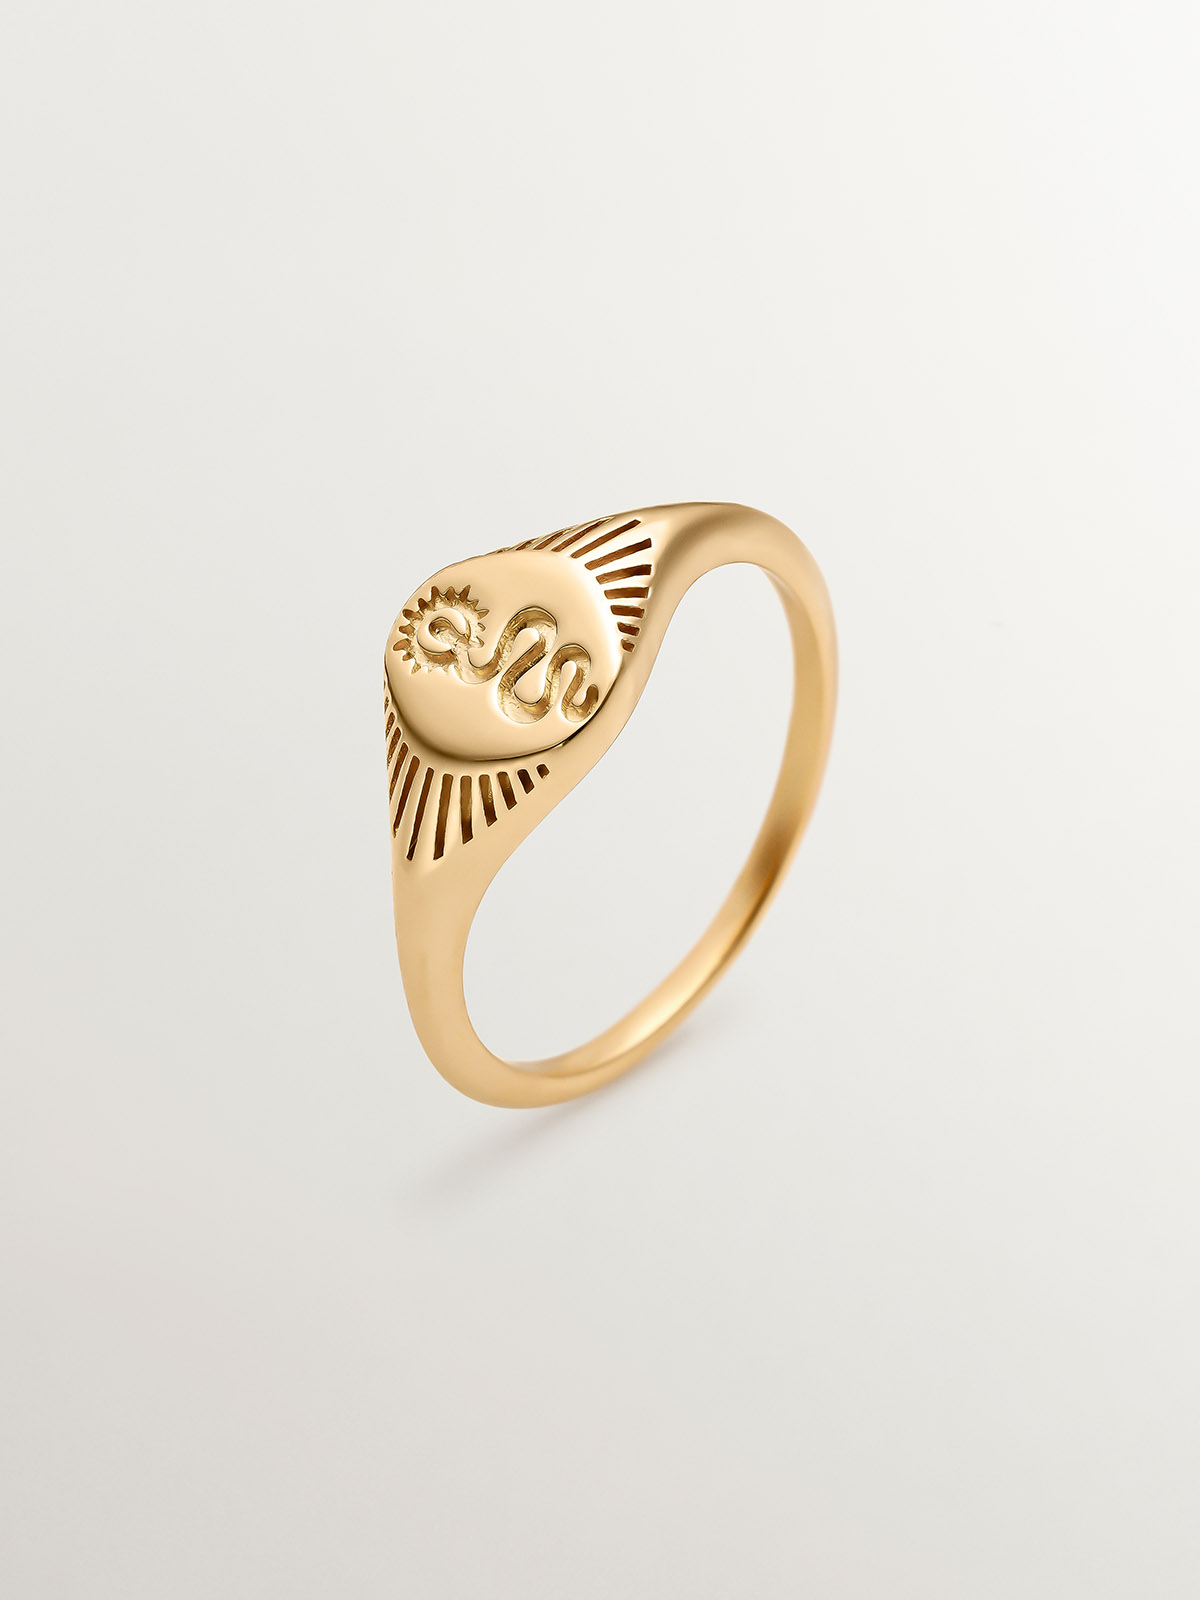 925 Silver seal ring dipped in 18K Yellow Gold with Snake